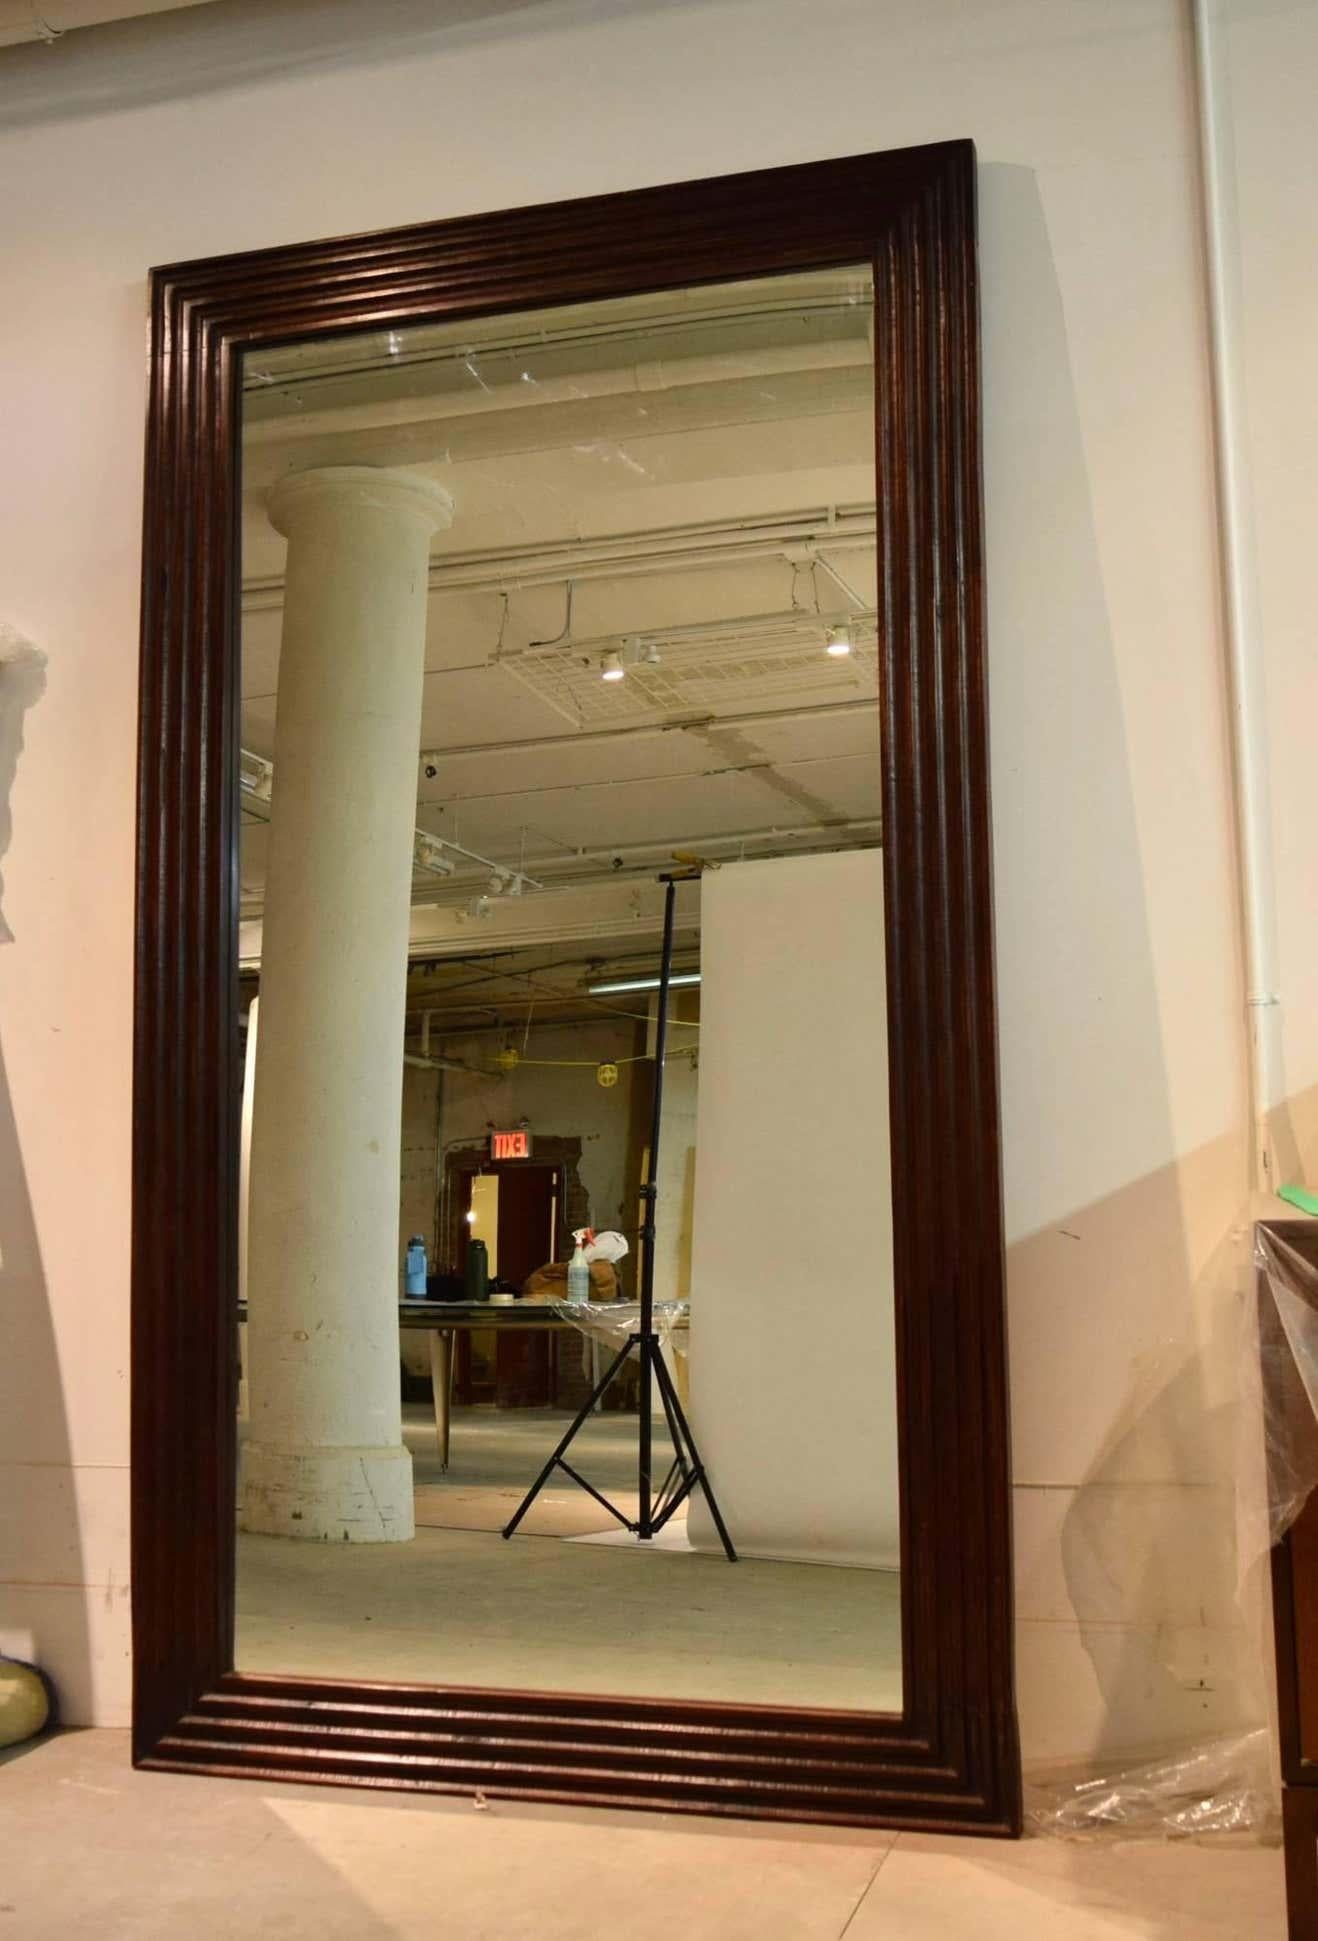 Large scale, full length mirror with hand fluted solid wood frames in very good, original condition and ready to hang horizontally or vertically. It can also be used as a floor mirror leaned against a wall as shown. Thicknesses/depths vary from 1.25